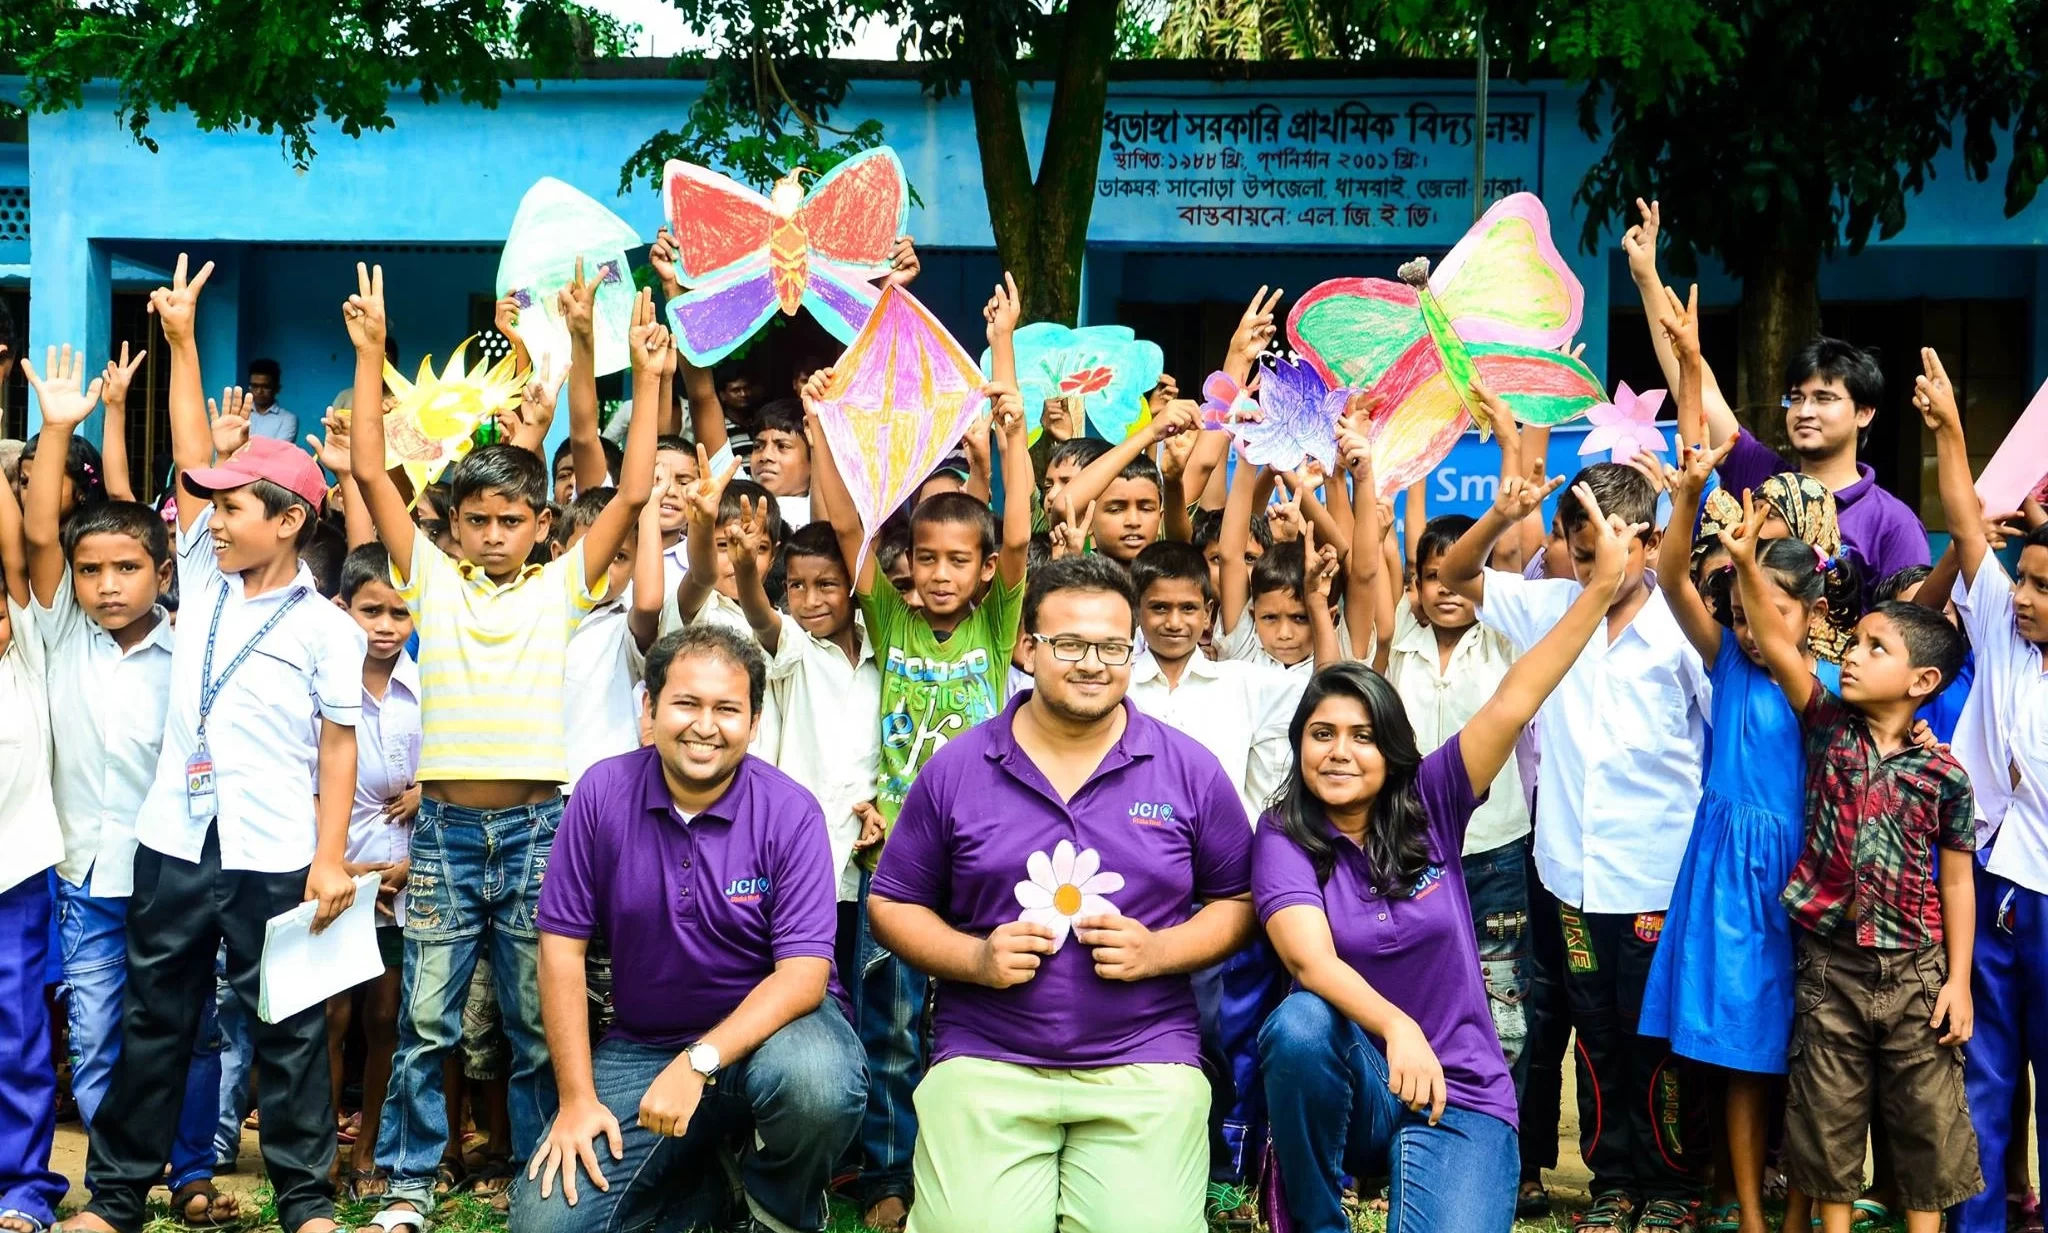 Paint a Smile By Organized by JCI Dhaka West (1)